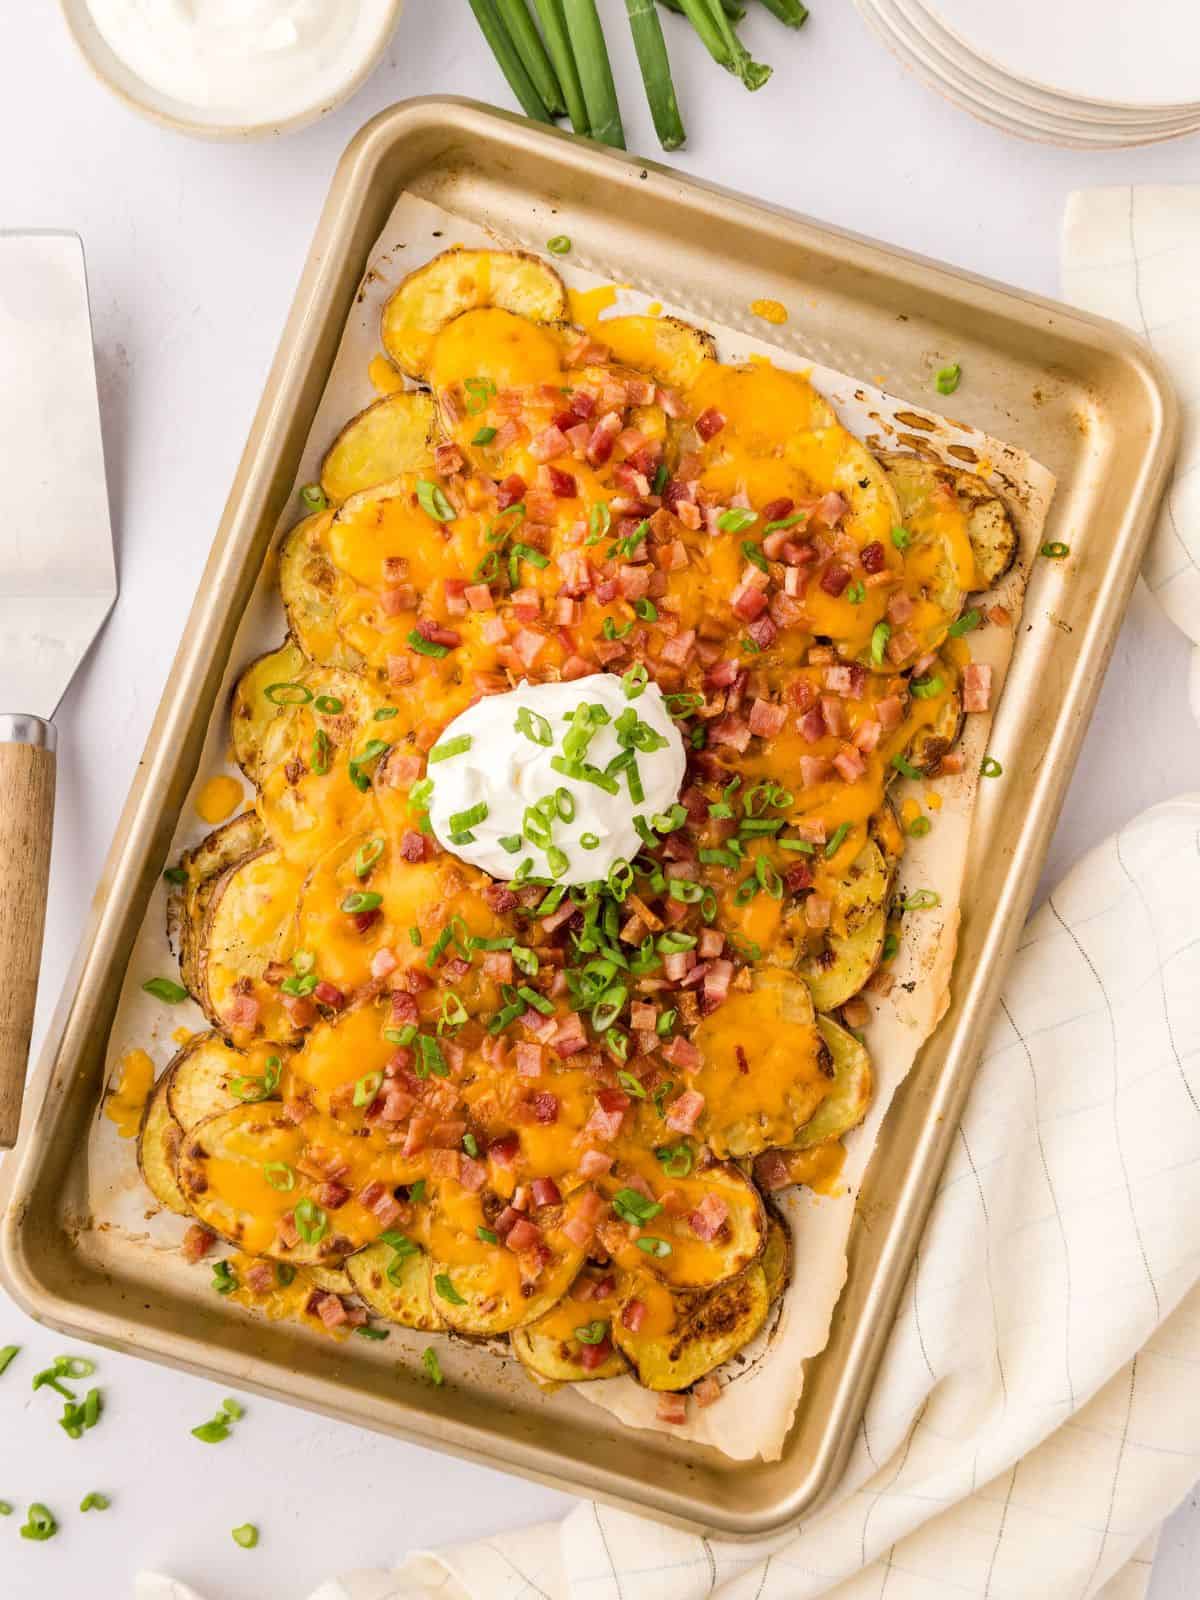 Loaded Irish Potato Nachos made with crispy baked potato slices topped with cheese and bacon on sheet pan topped with green onions and sour cream.